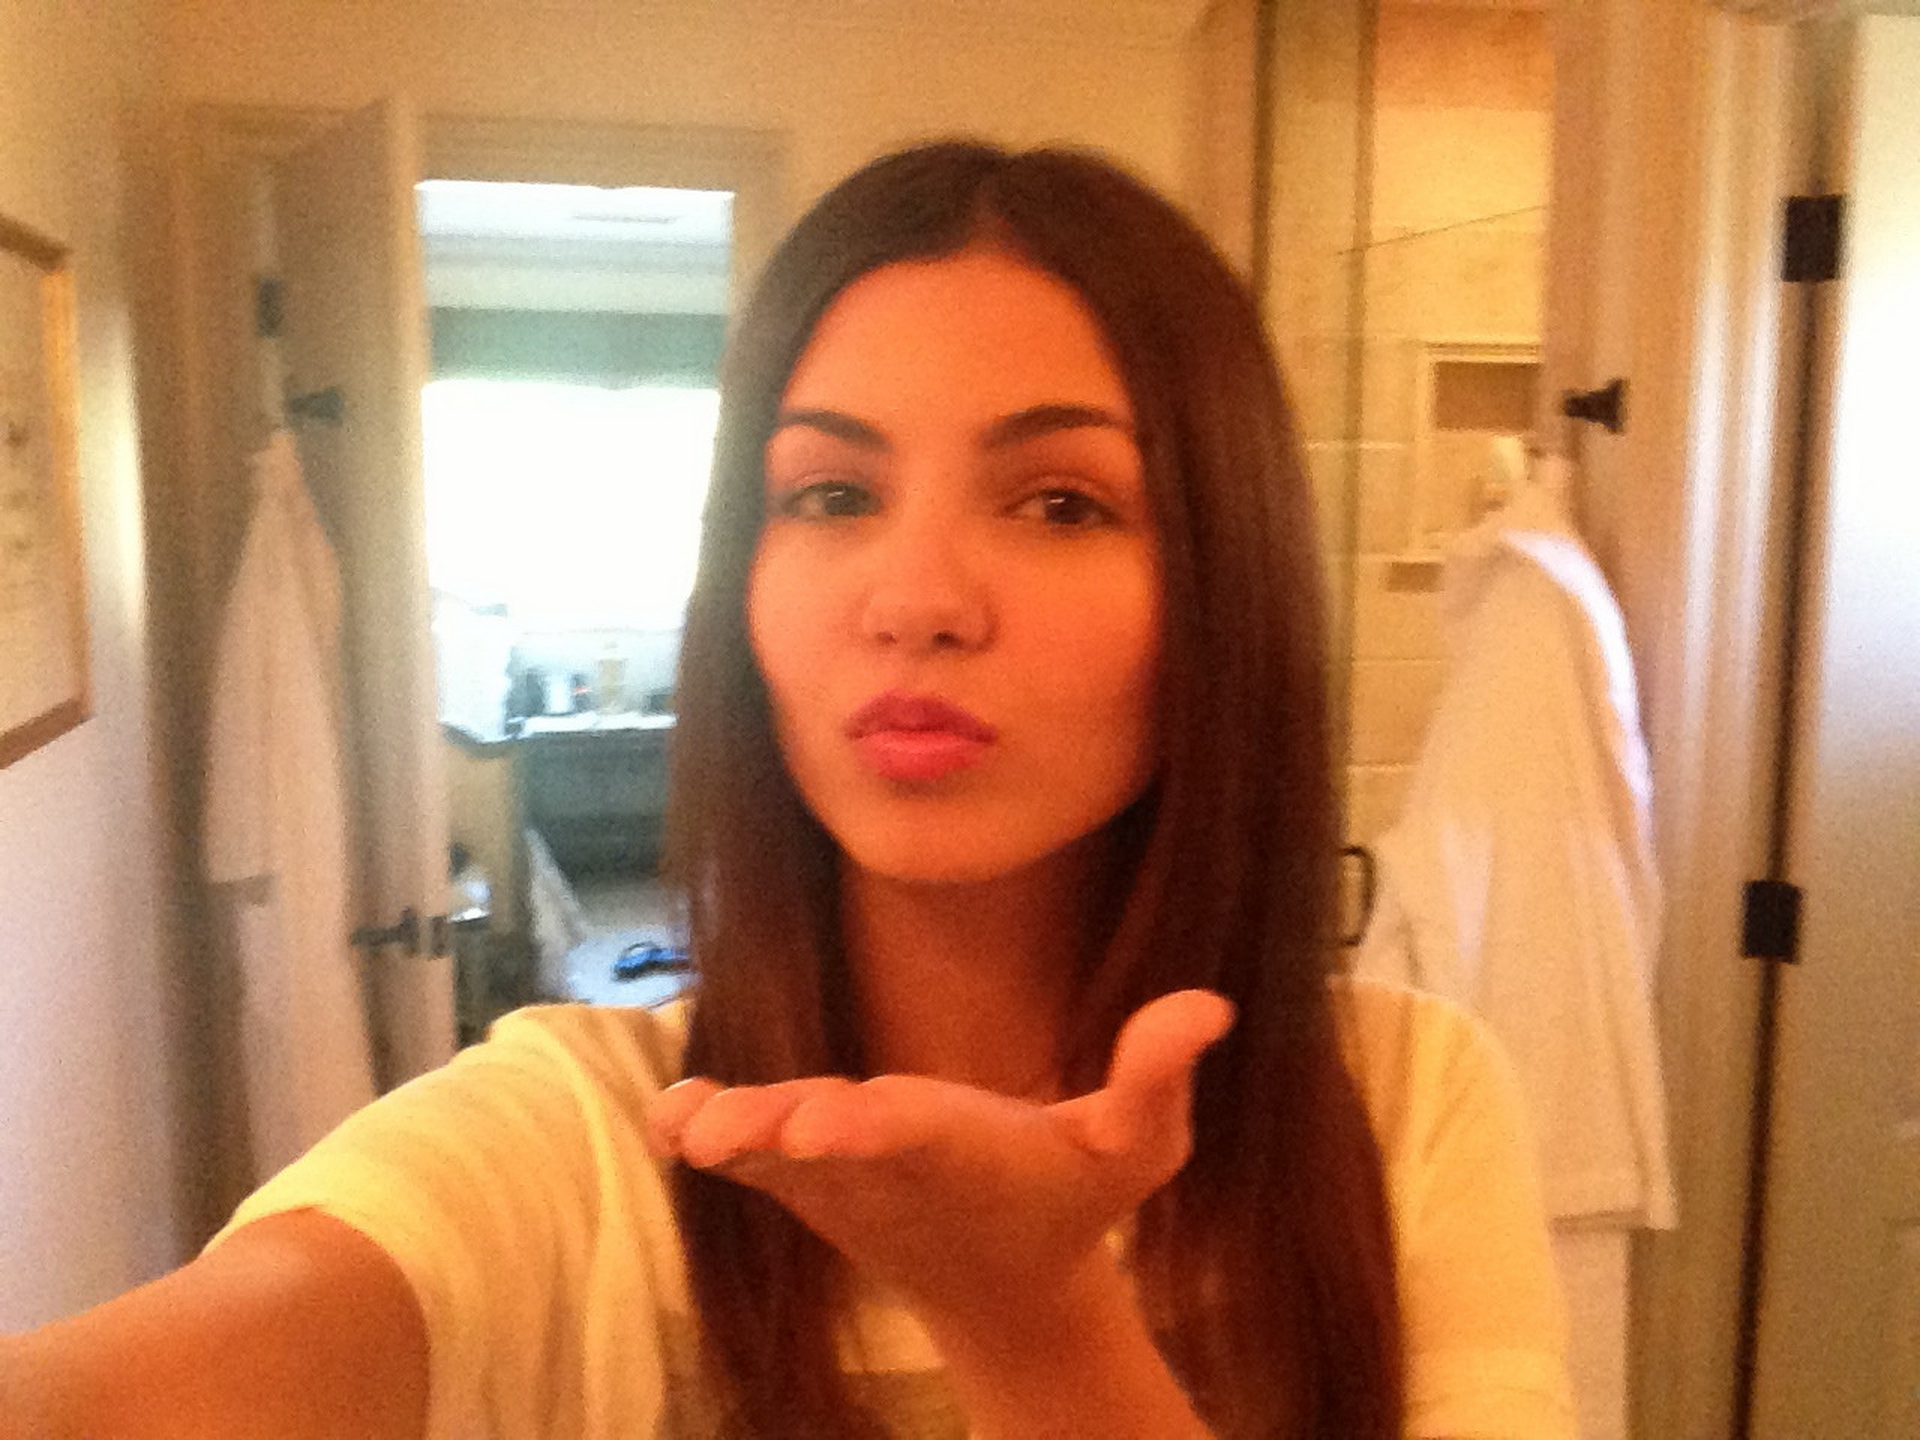 Victoria_Justice_leaked_private_nude_photo_hacked_personal_naked_pics_36x_MixQ_33.jpg